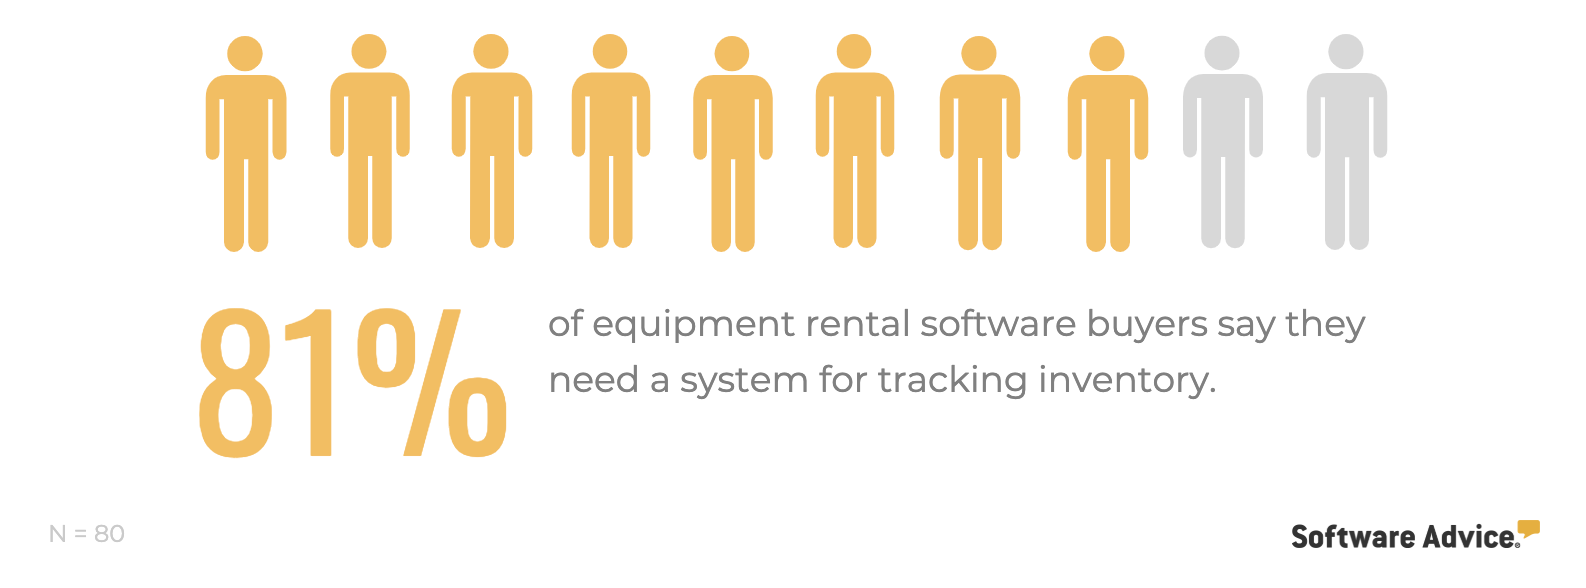 equipment-rental-software-buyers-track-inventory